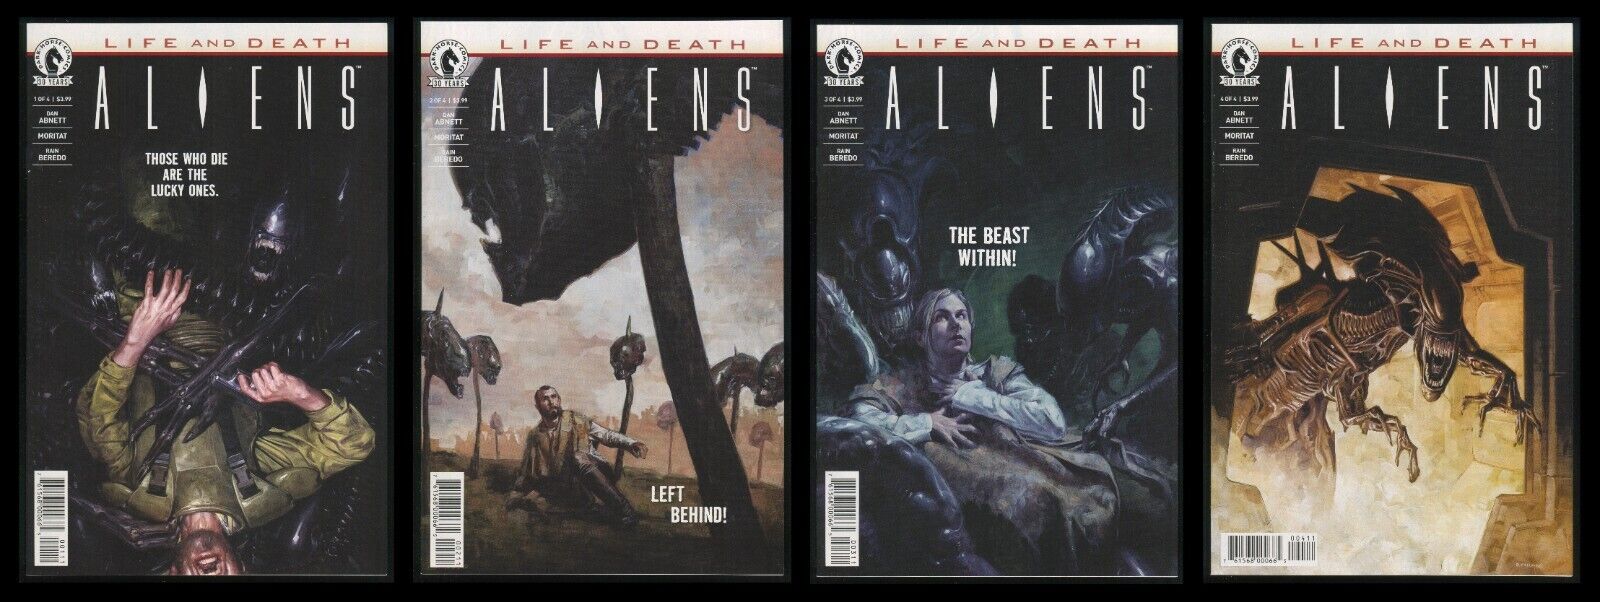 Aliens Life and Death Comic Set 1-2-3-4 Lot 43 years after Aliens 1986 Movie 